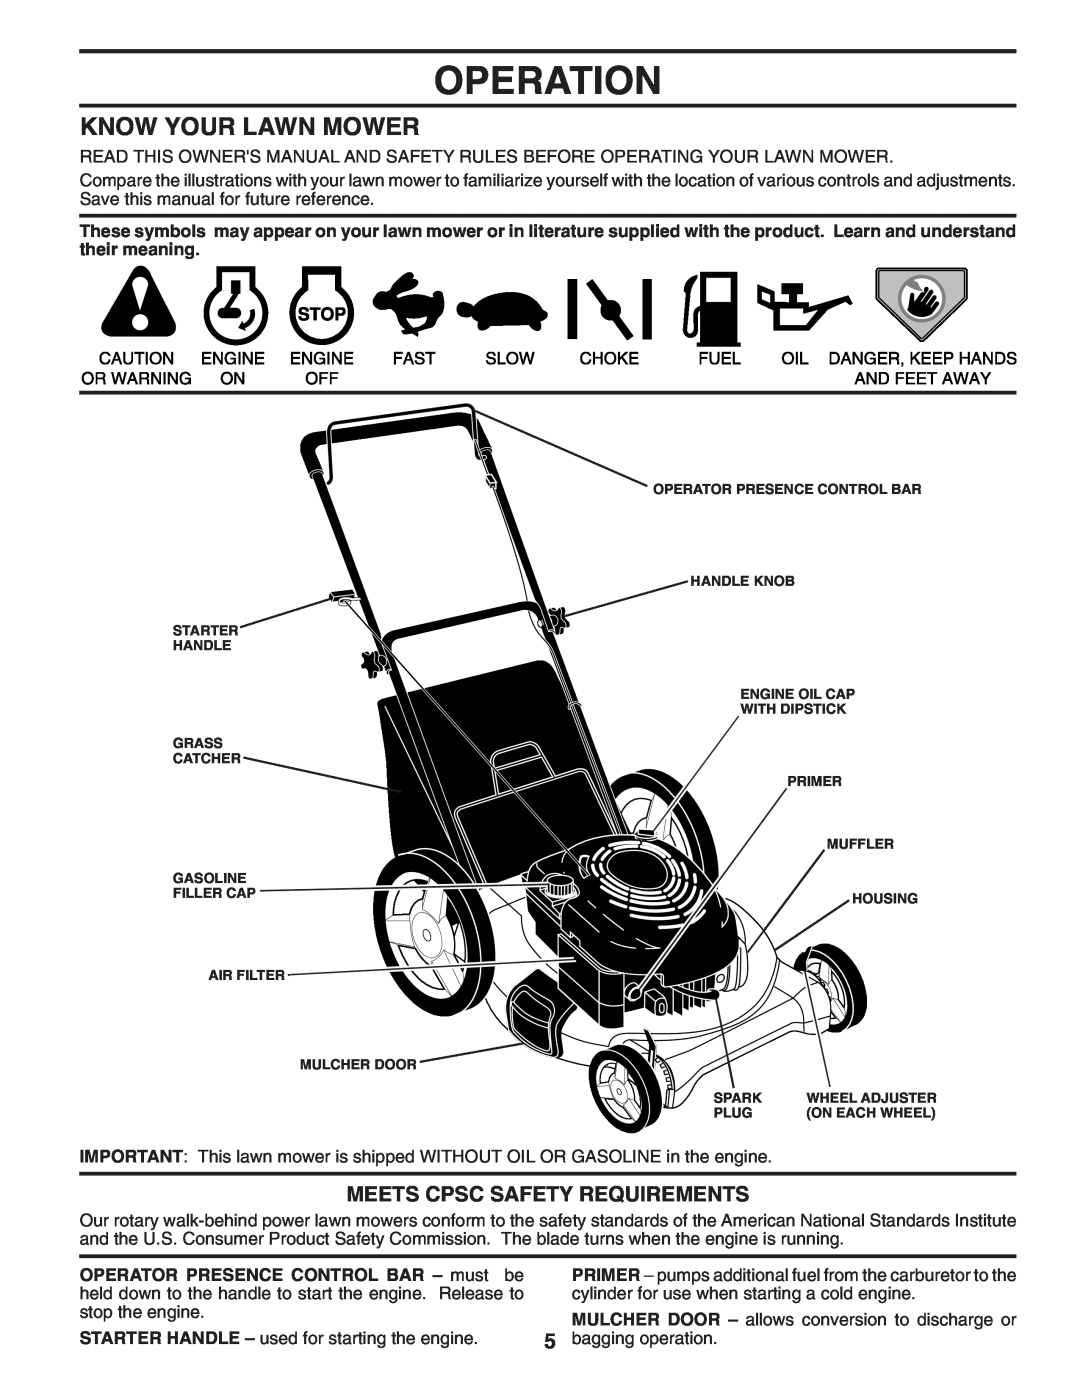 Husqvarna 6521CM owner manual Operation, Know Your Lawn Mower, Meets Cpsc Safety Requirements 